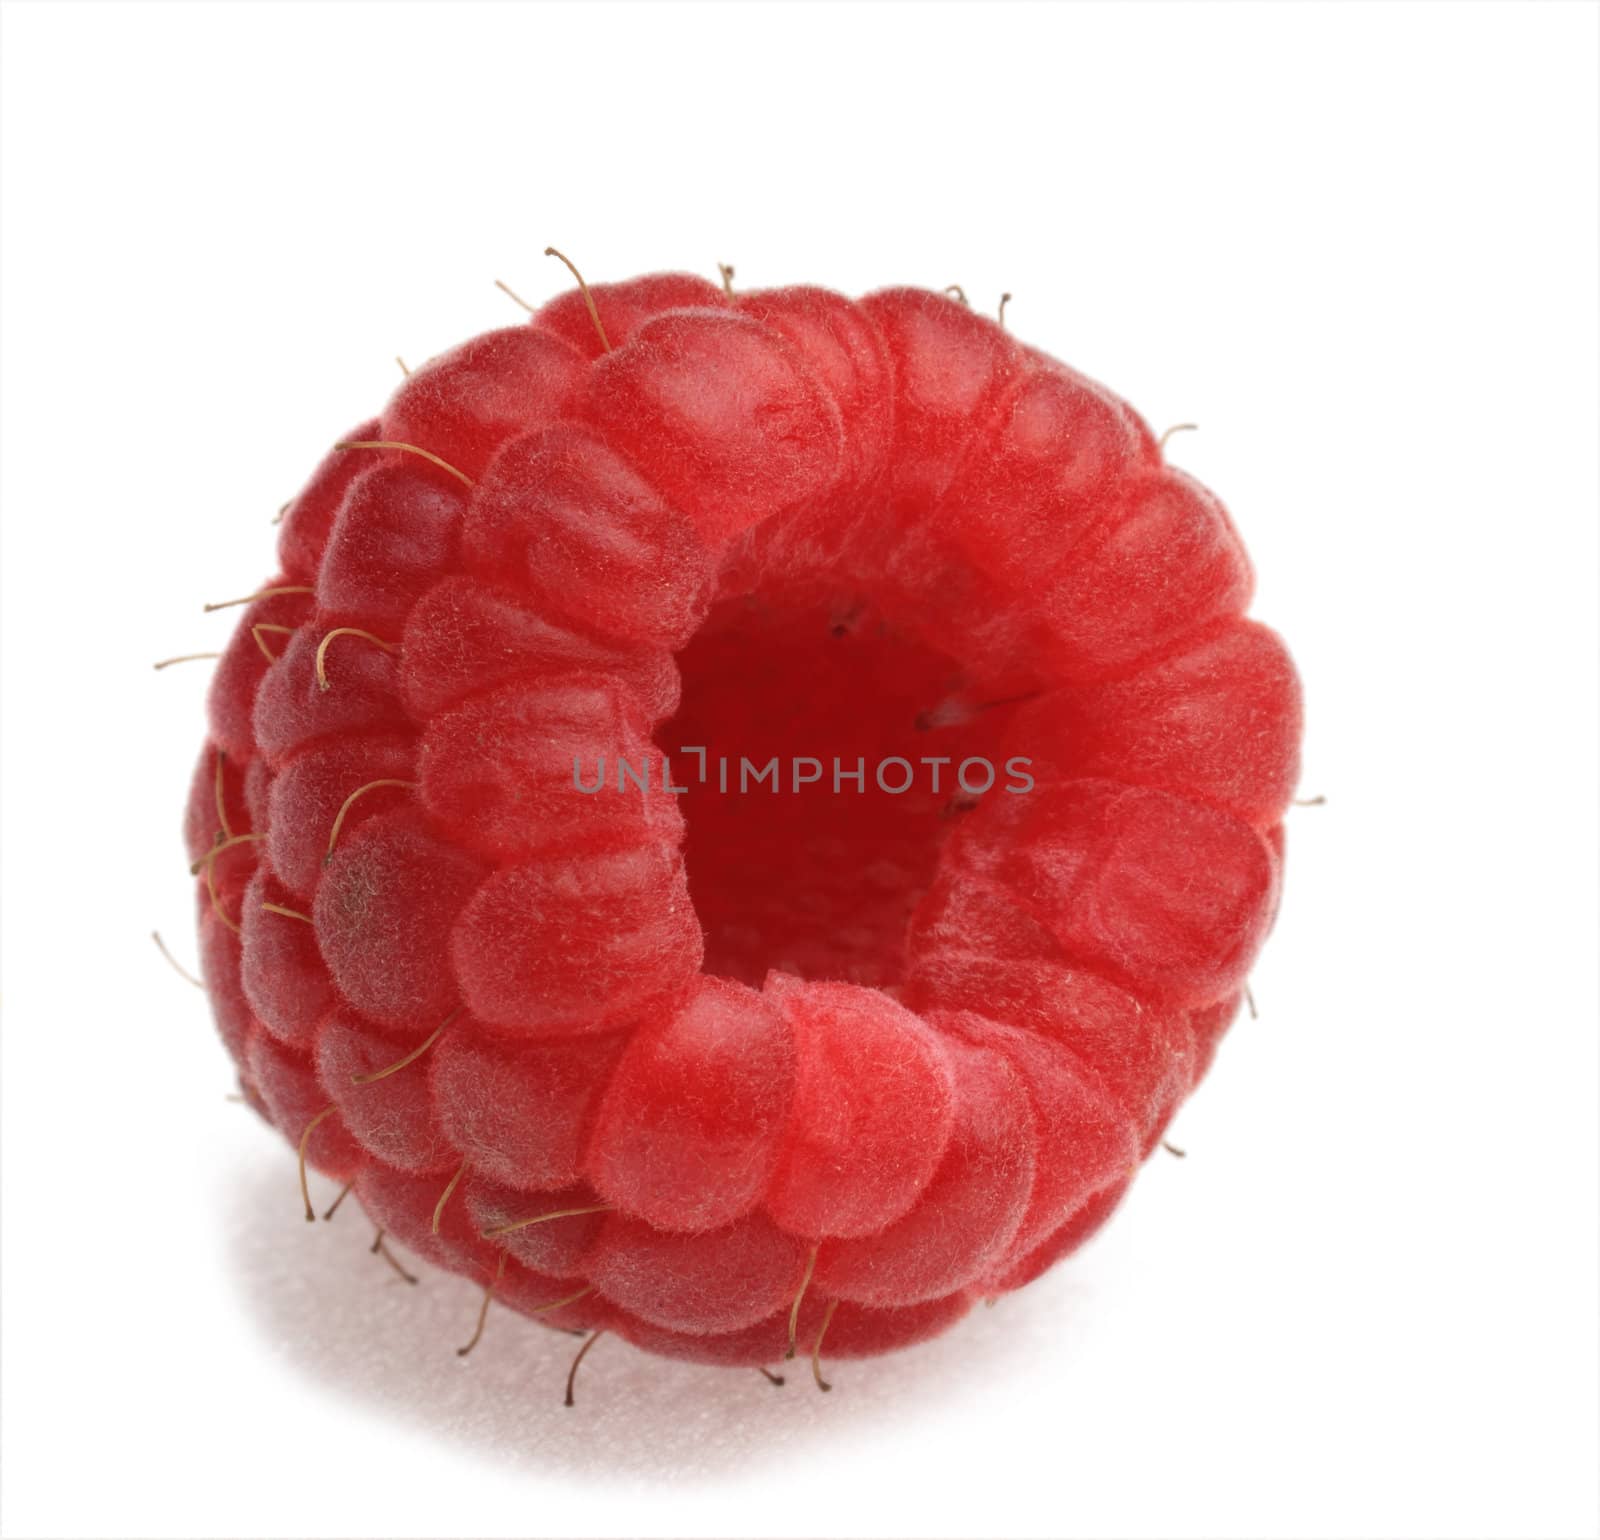 Macro shot of a raspberry photographed in a studio against a white background.